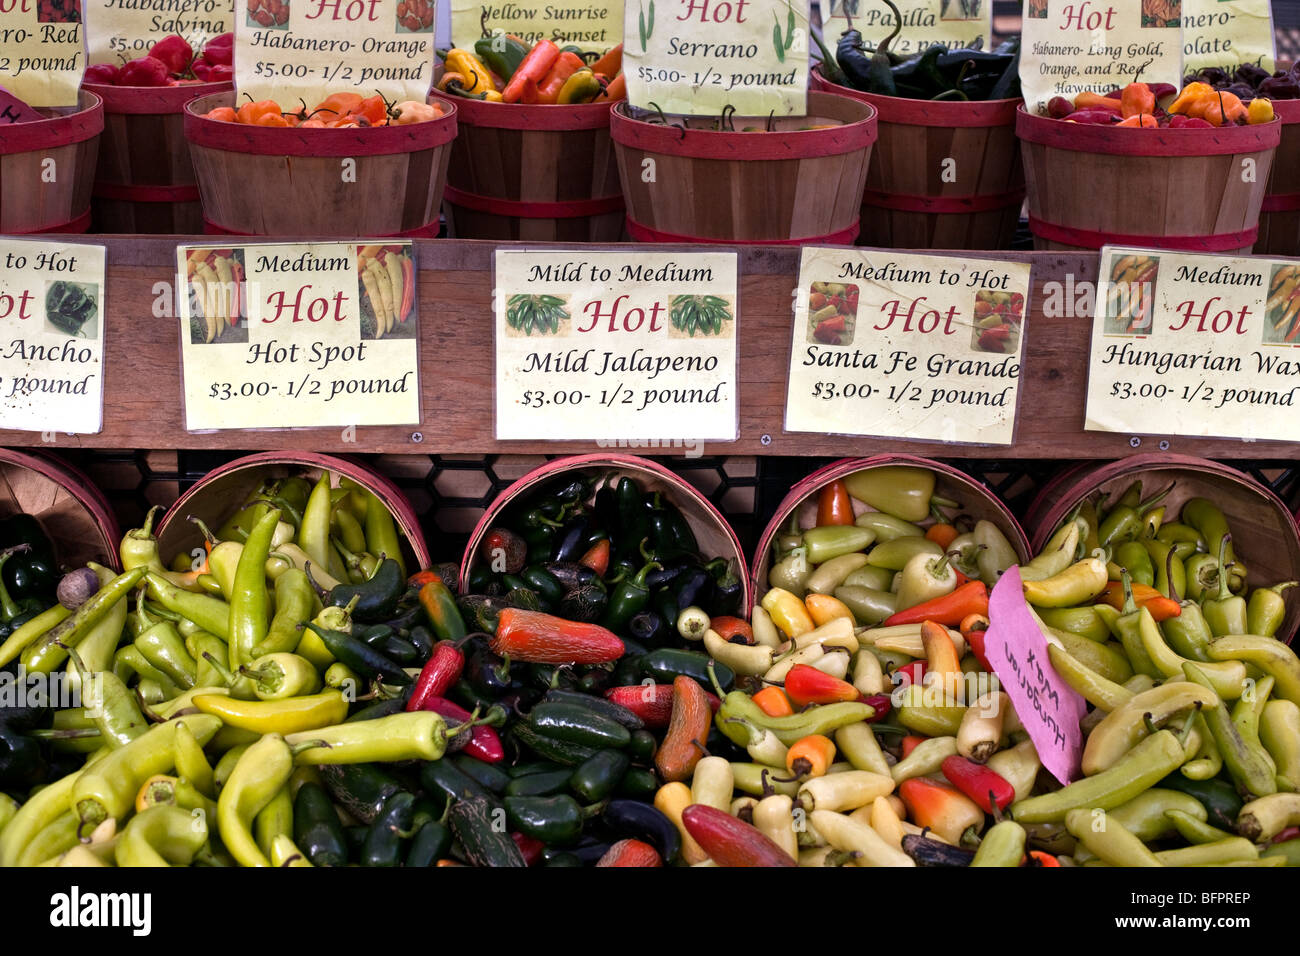 display of amazing variety of beautifully colored peppers graphically described for degree of heat at Union Square green market Stock Photo